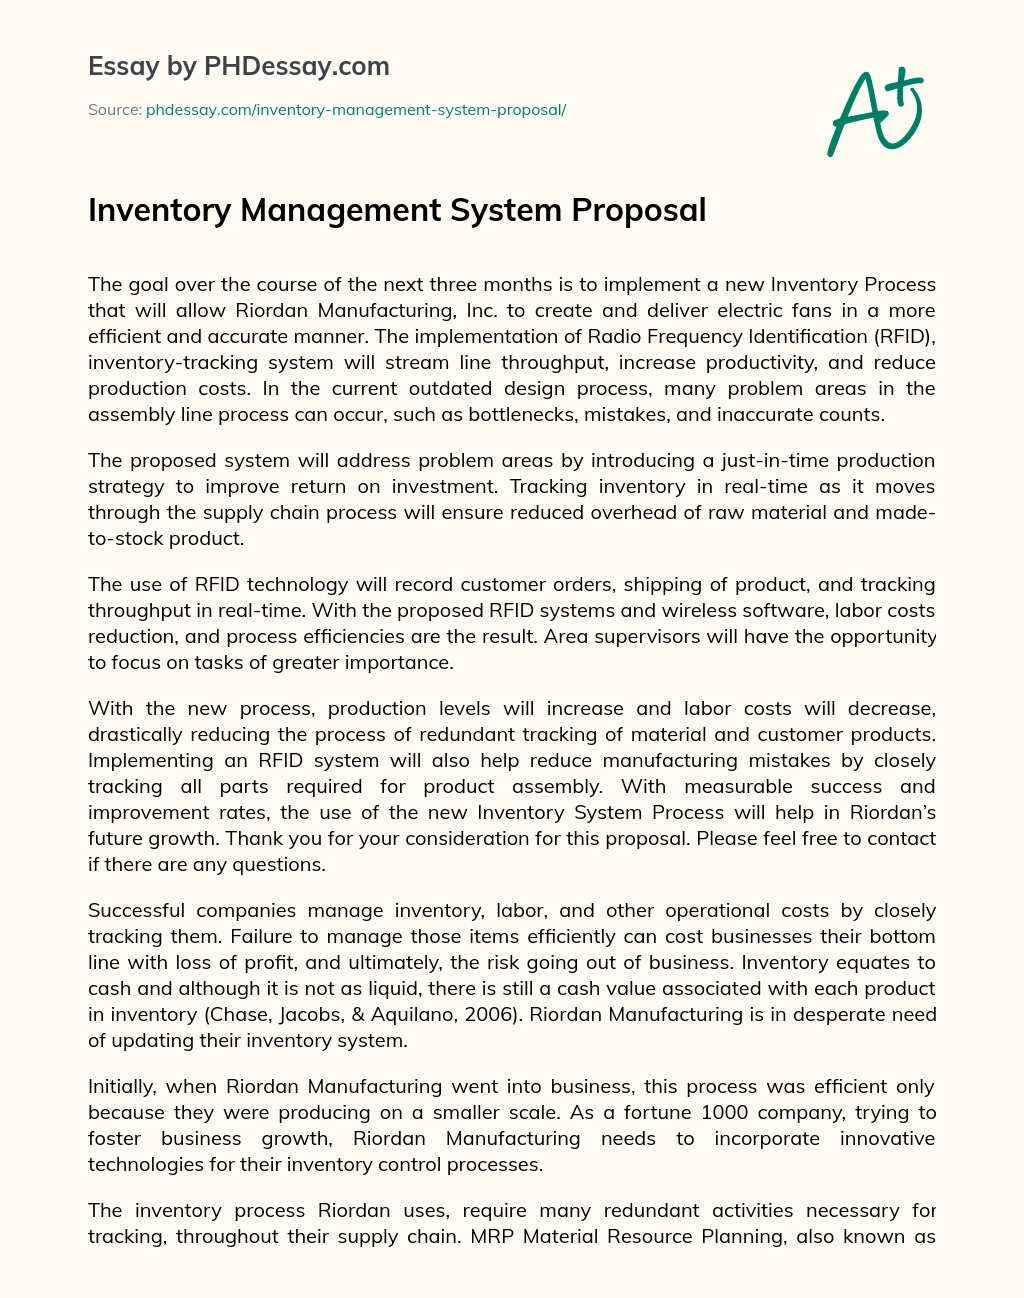 Inventory Management System Proposal essay